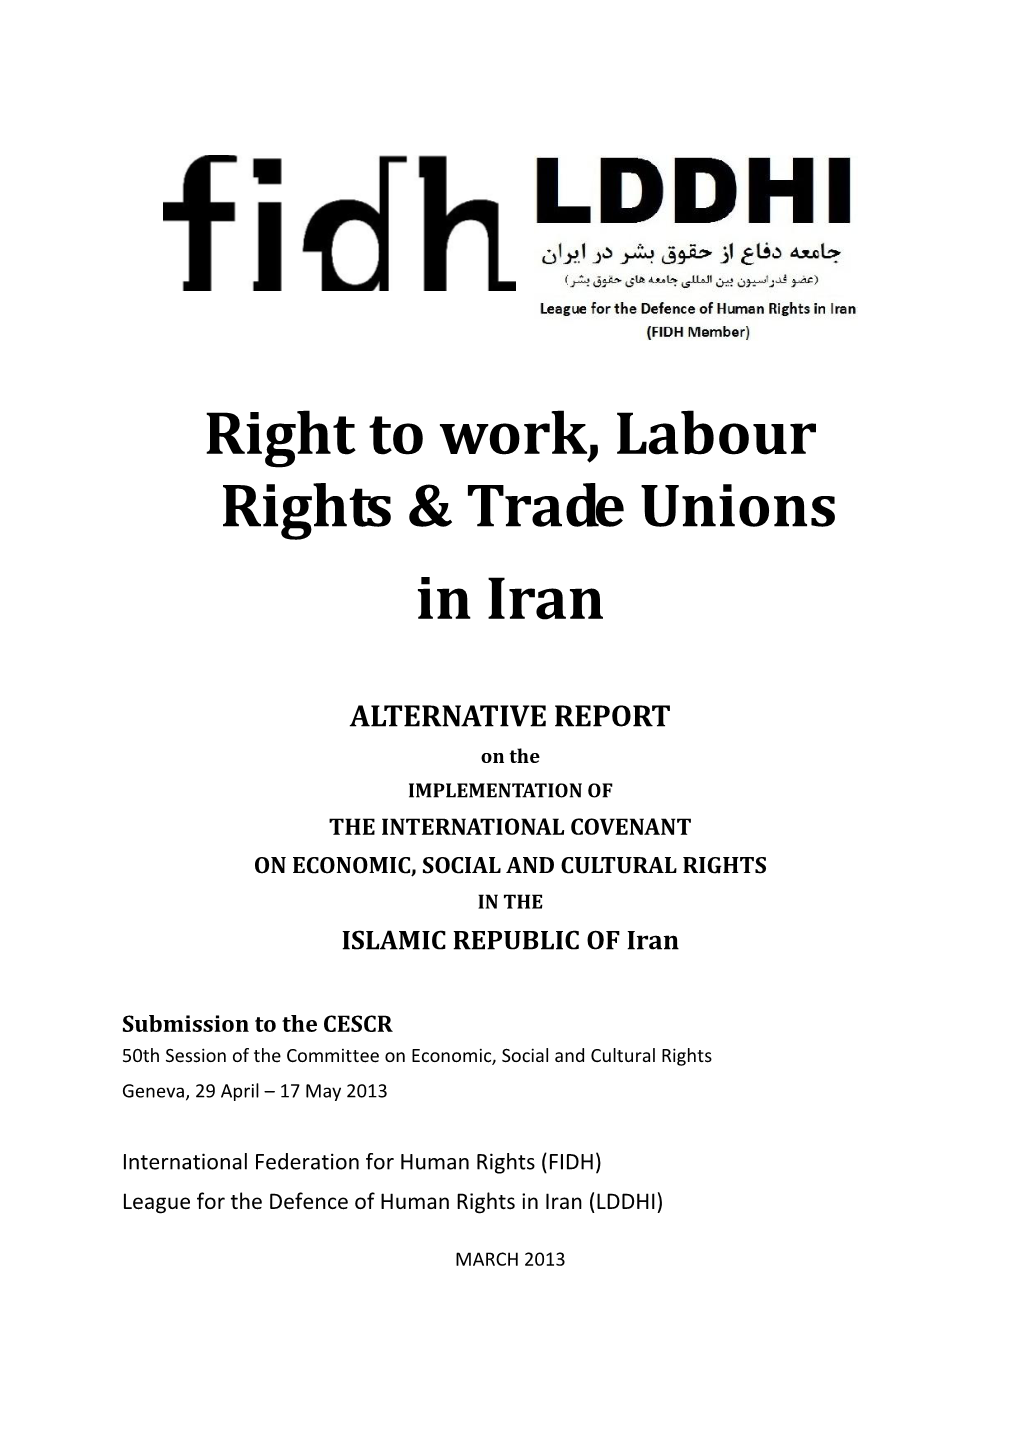 Right to Work, Labour Rights & Trade Unions in Iran